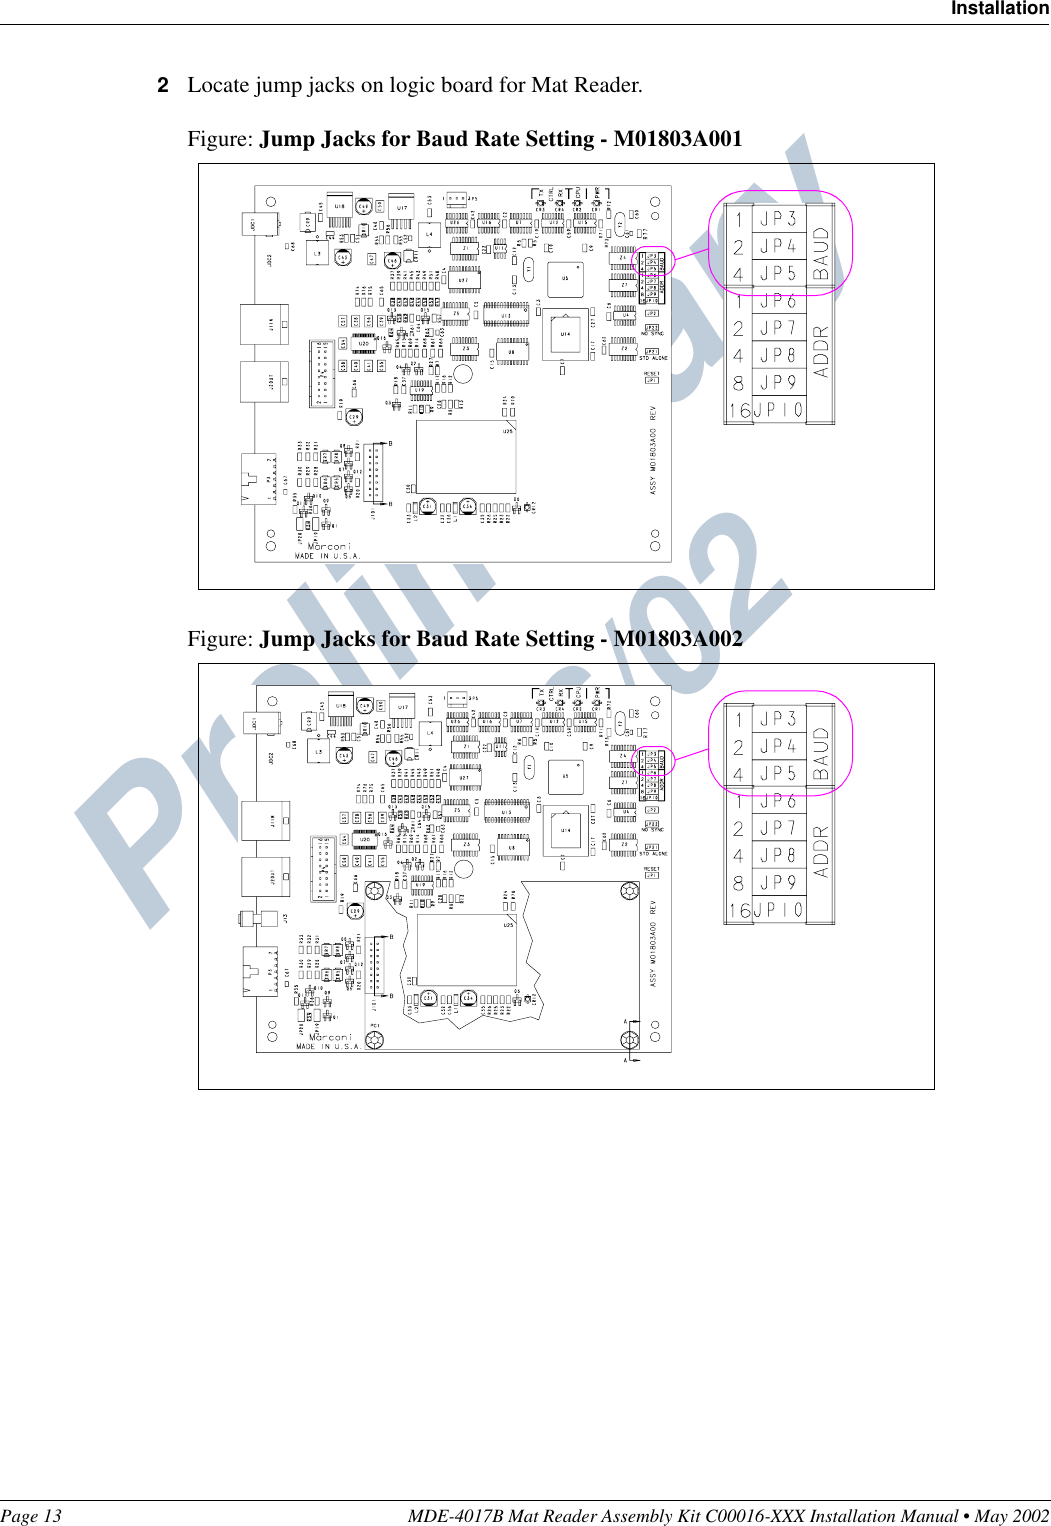 Preliminary  05/16/02Page 13 MDE-4017B Mat Reader Assembly Kit C00016-XXX Installation Manual • May 2002Installation2Locate jump jacks on logic board for Mat Reader.Figure: Jump Jacks for Baud Rate Setting - M01803A001Figure: Jump Jacks for Baud Rate Setting - M01803A002